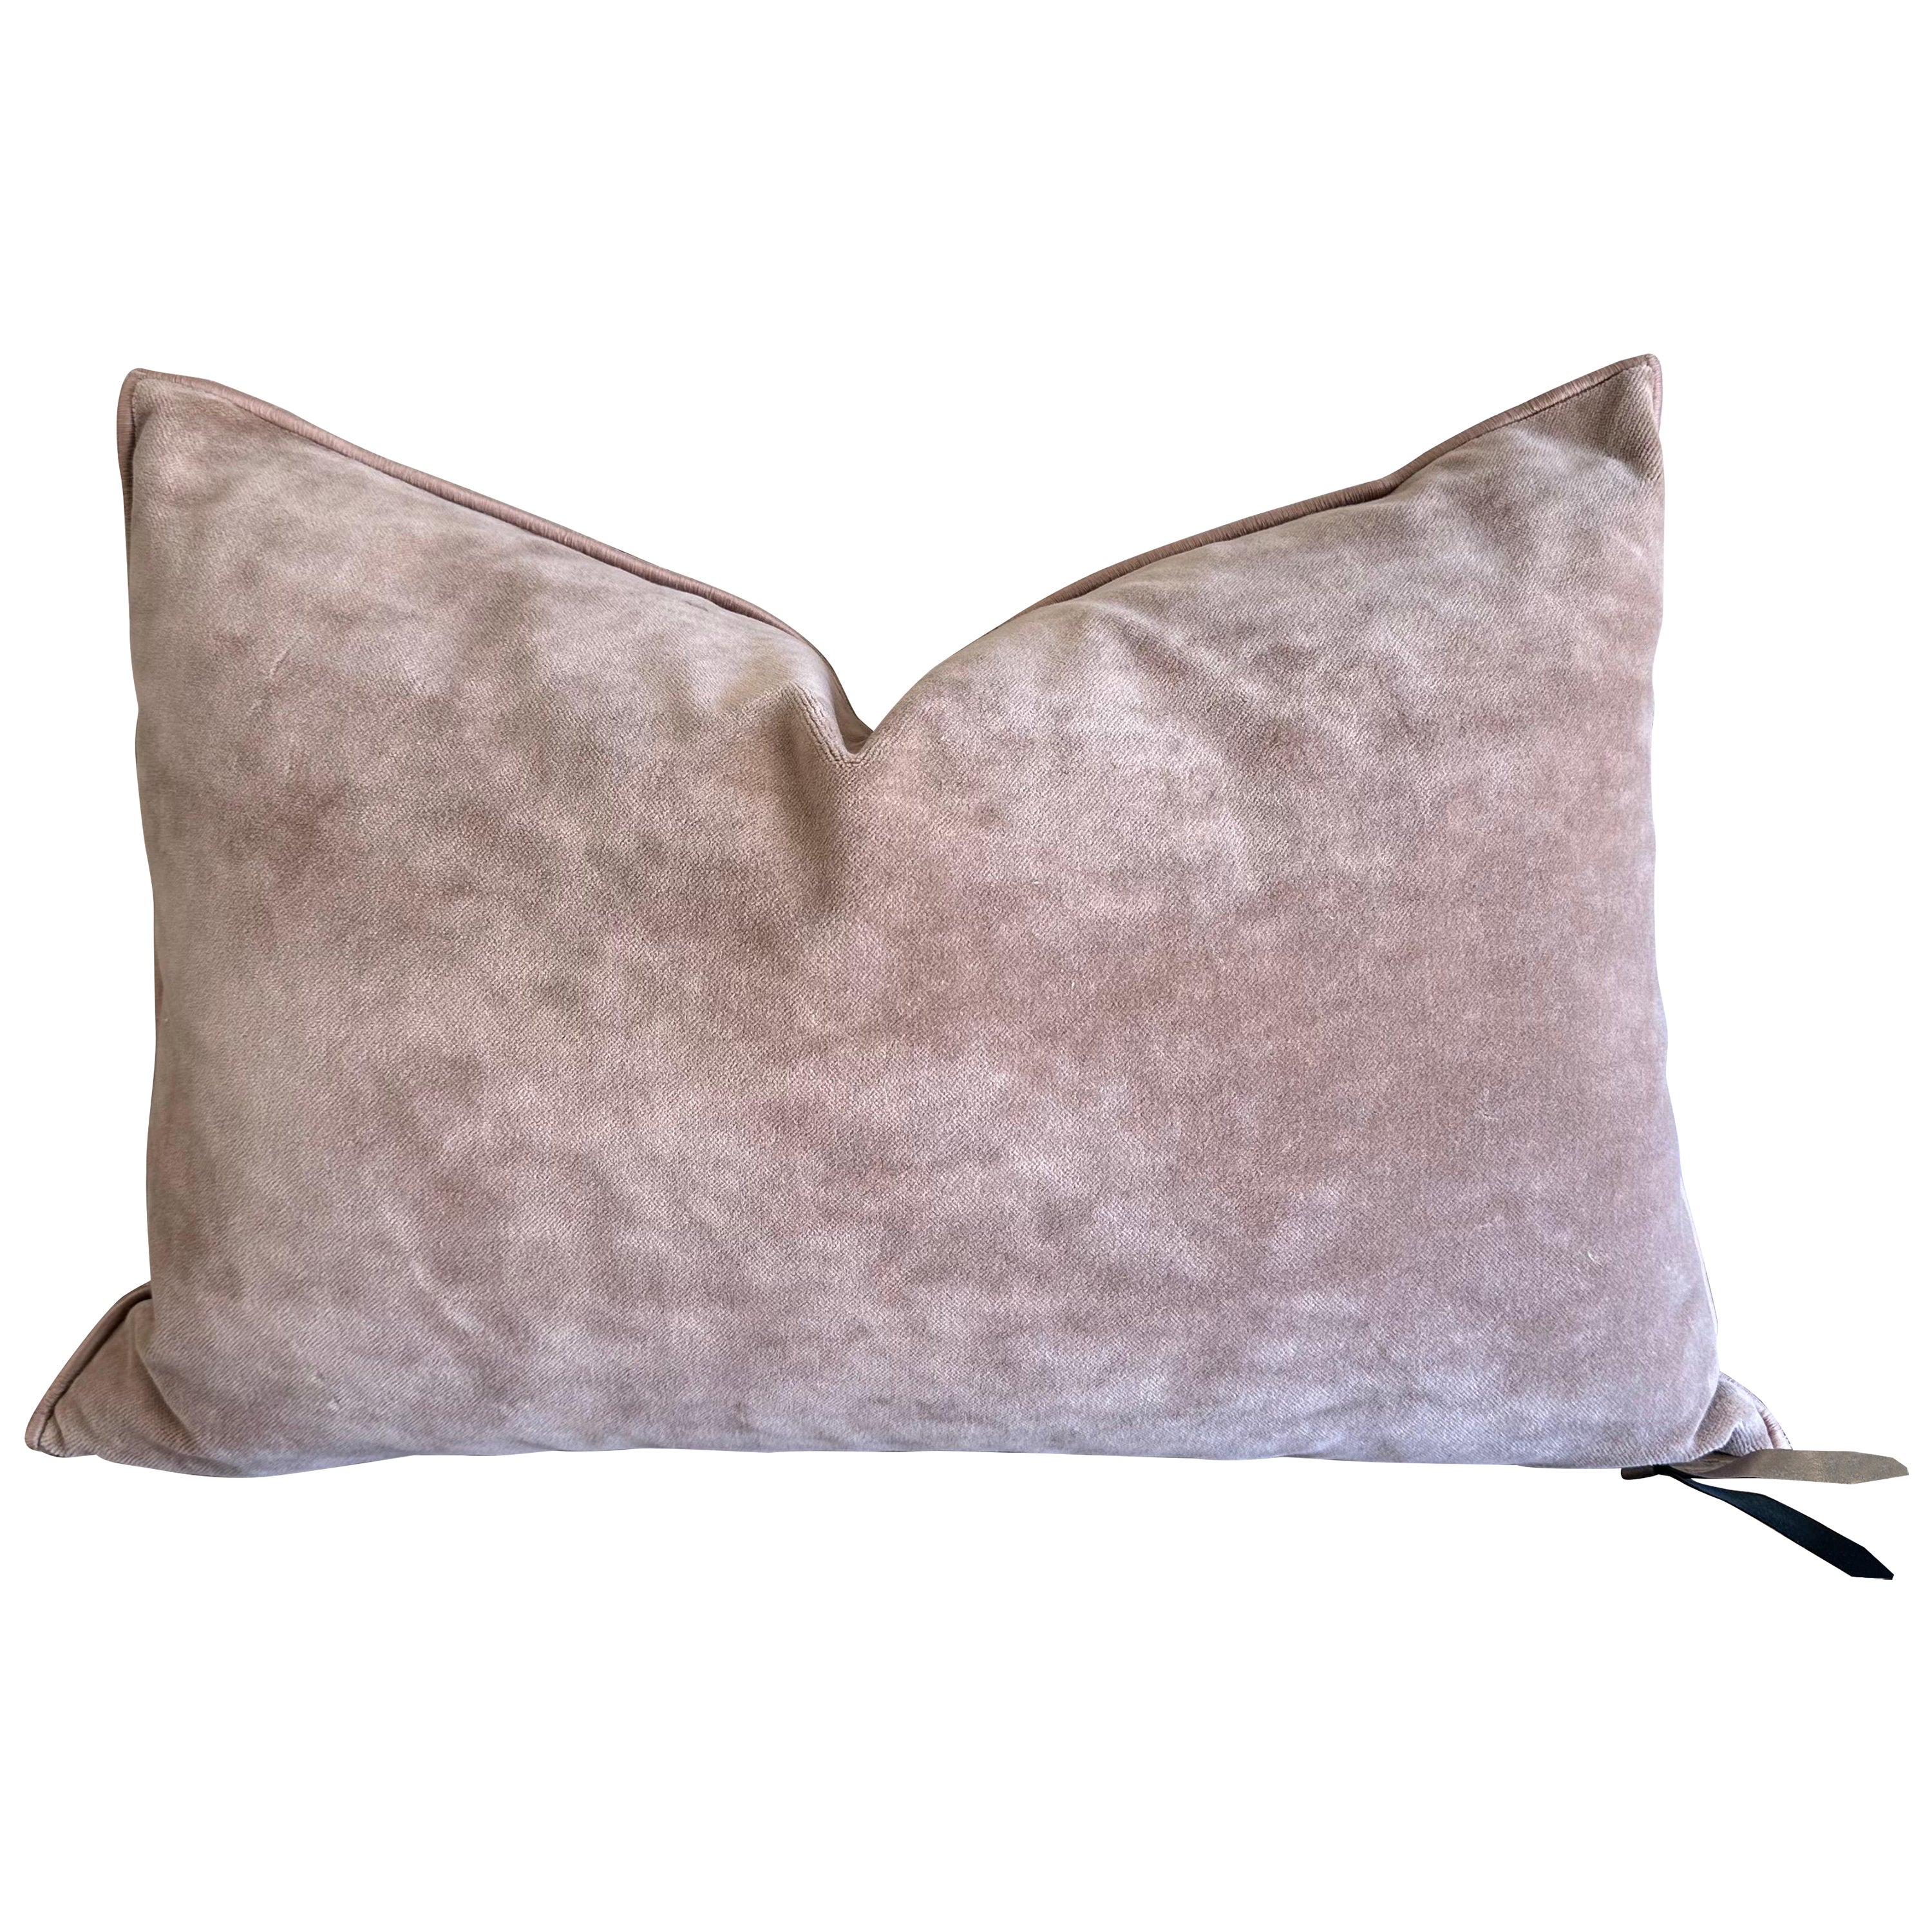 European Vintage Style Blush Velvet Accent Pillow with Down Insert For Sale